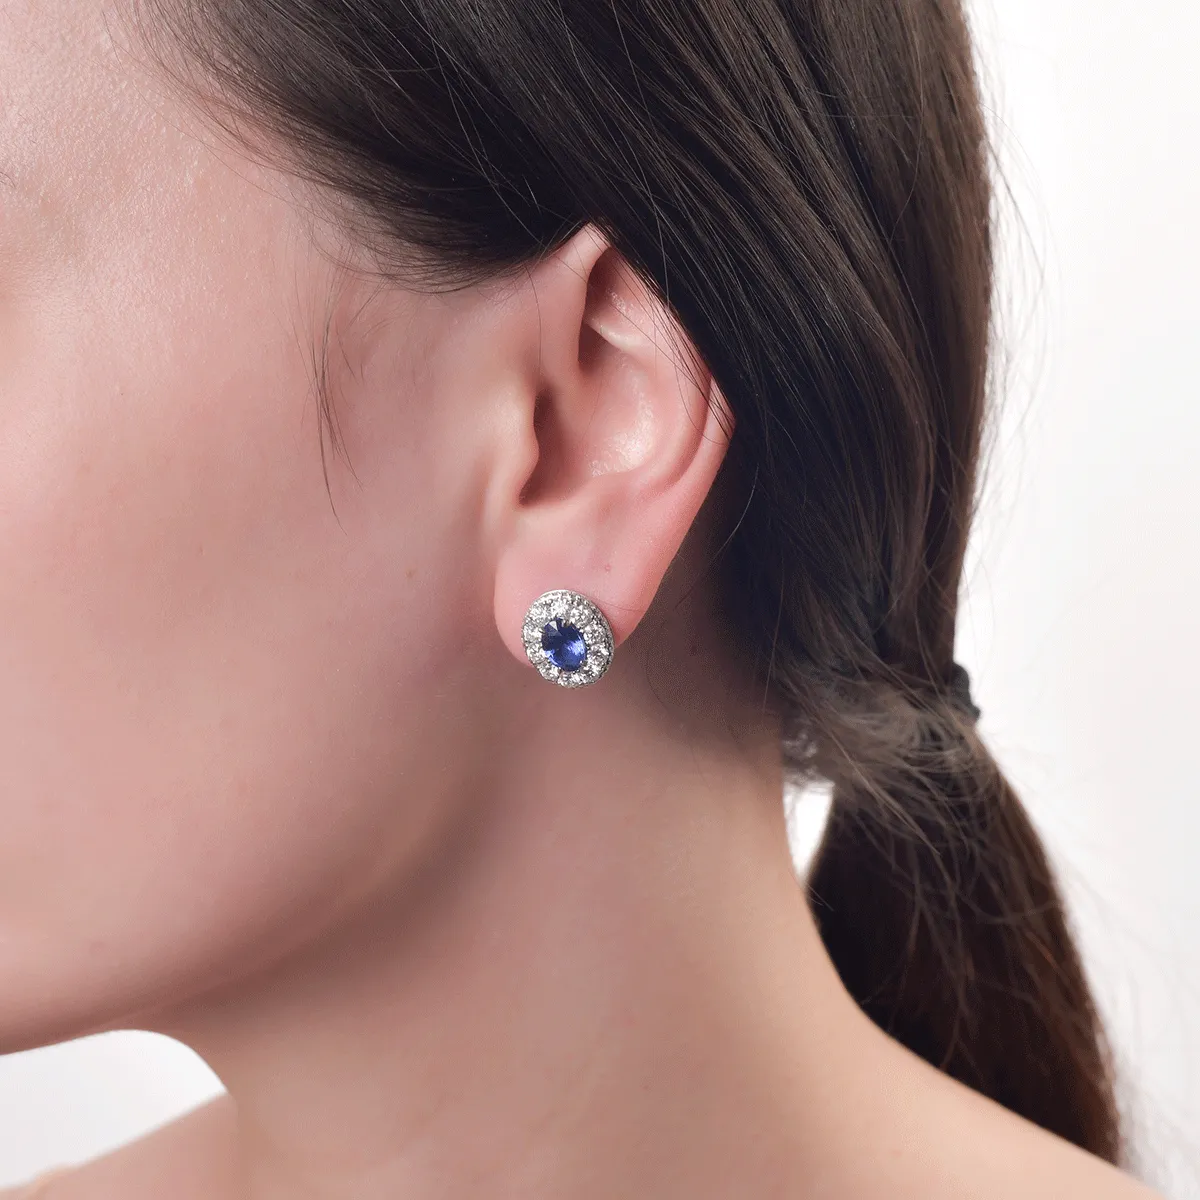 18K white gold earrings with 2.83ct sapphires and 2.49ct diamonds